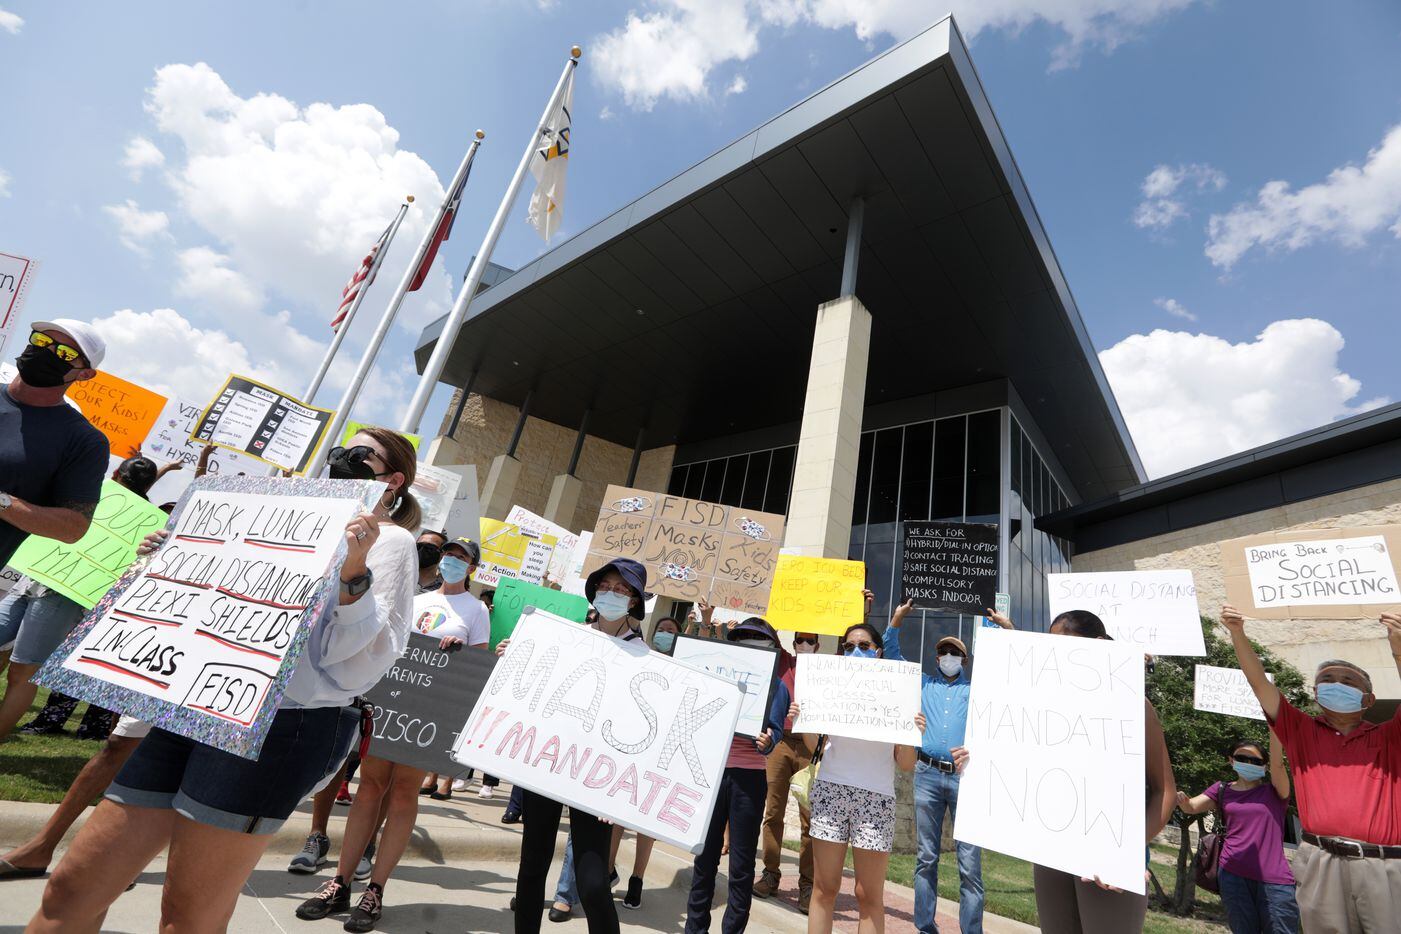 Community members seeking better COVID-19 protections gather during a protest at the Frisco ISD Administration Building in Frisco, TX, on Aug. 26, 2021.